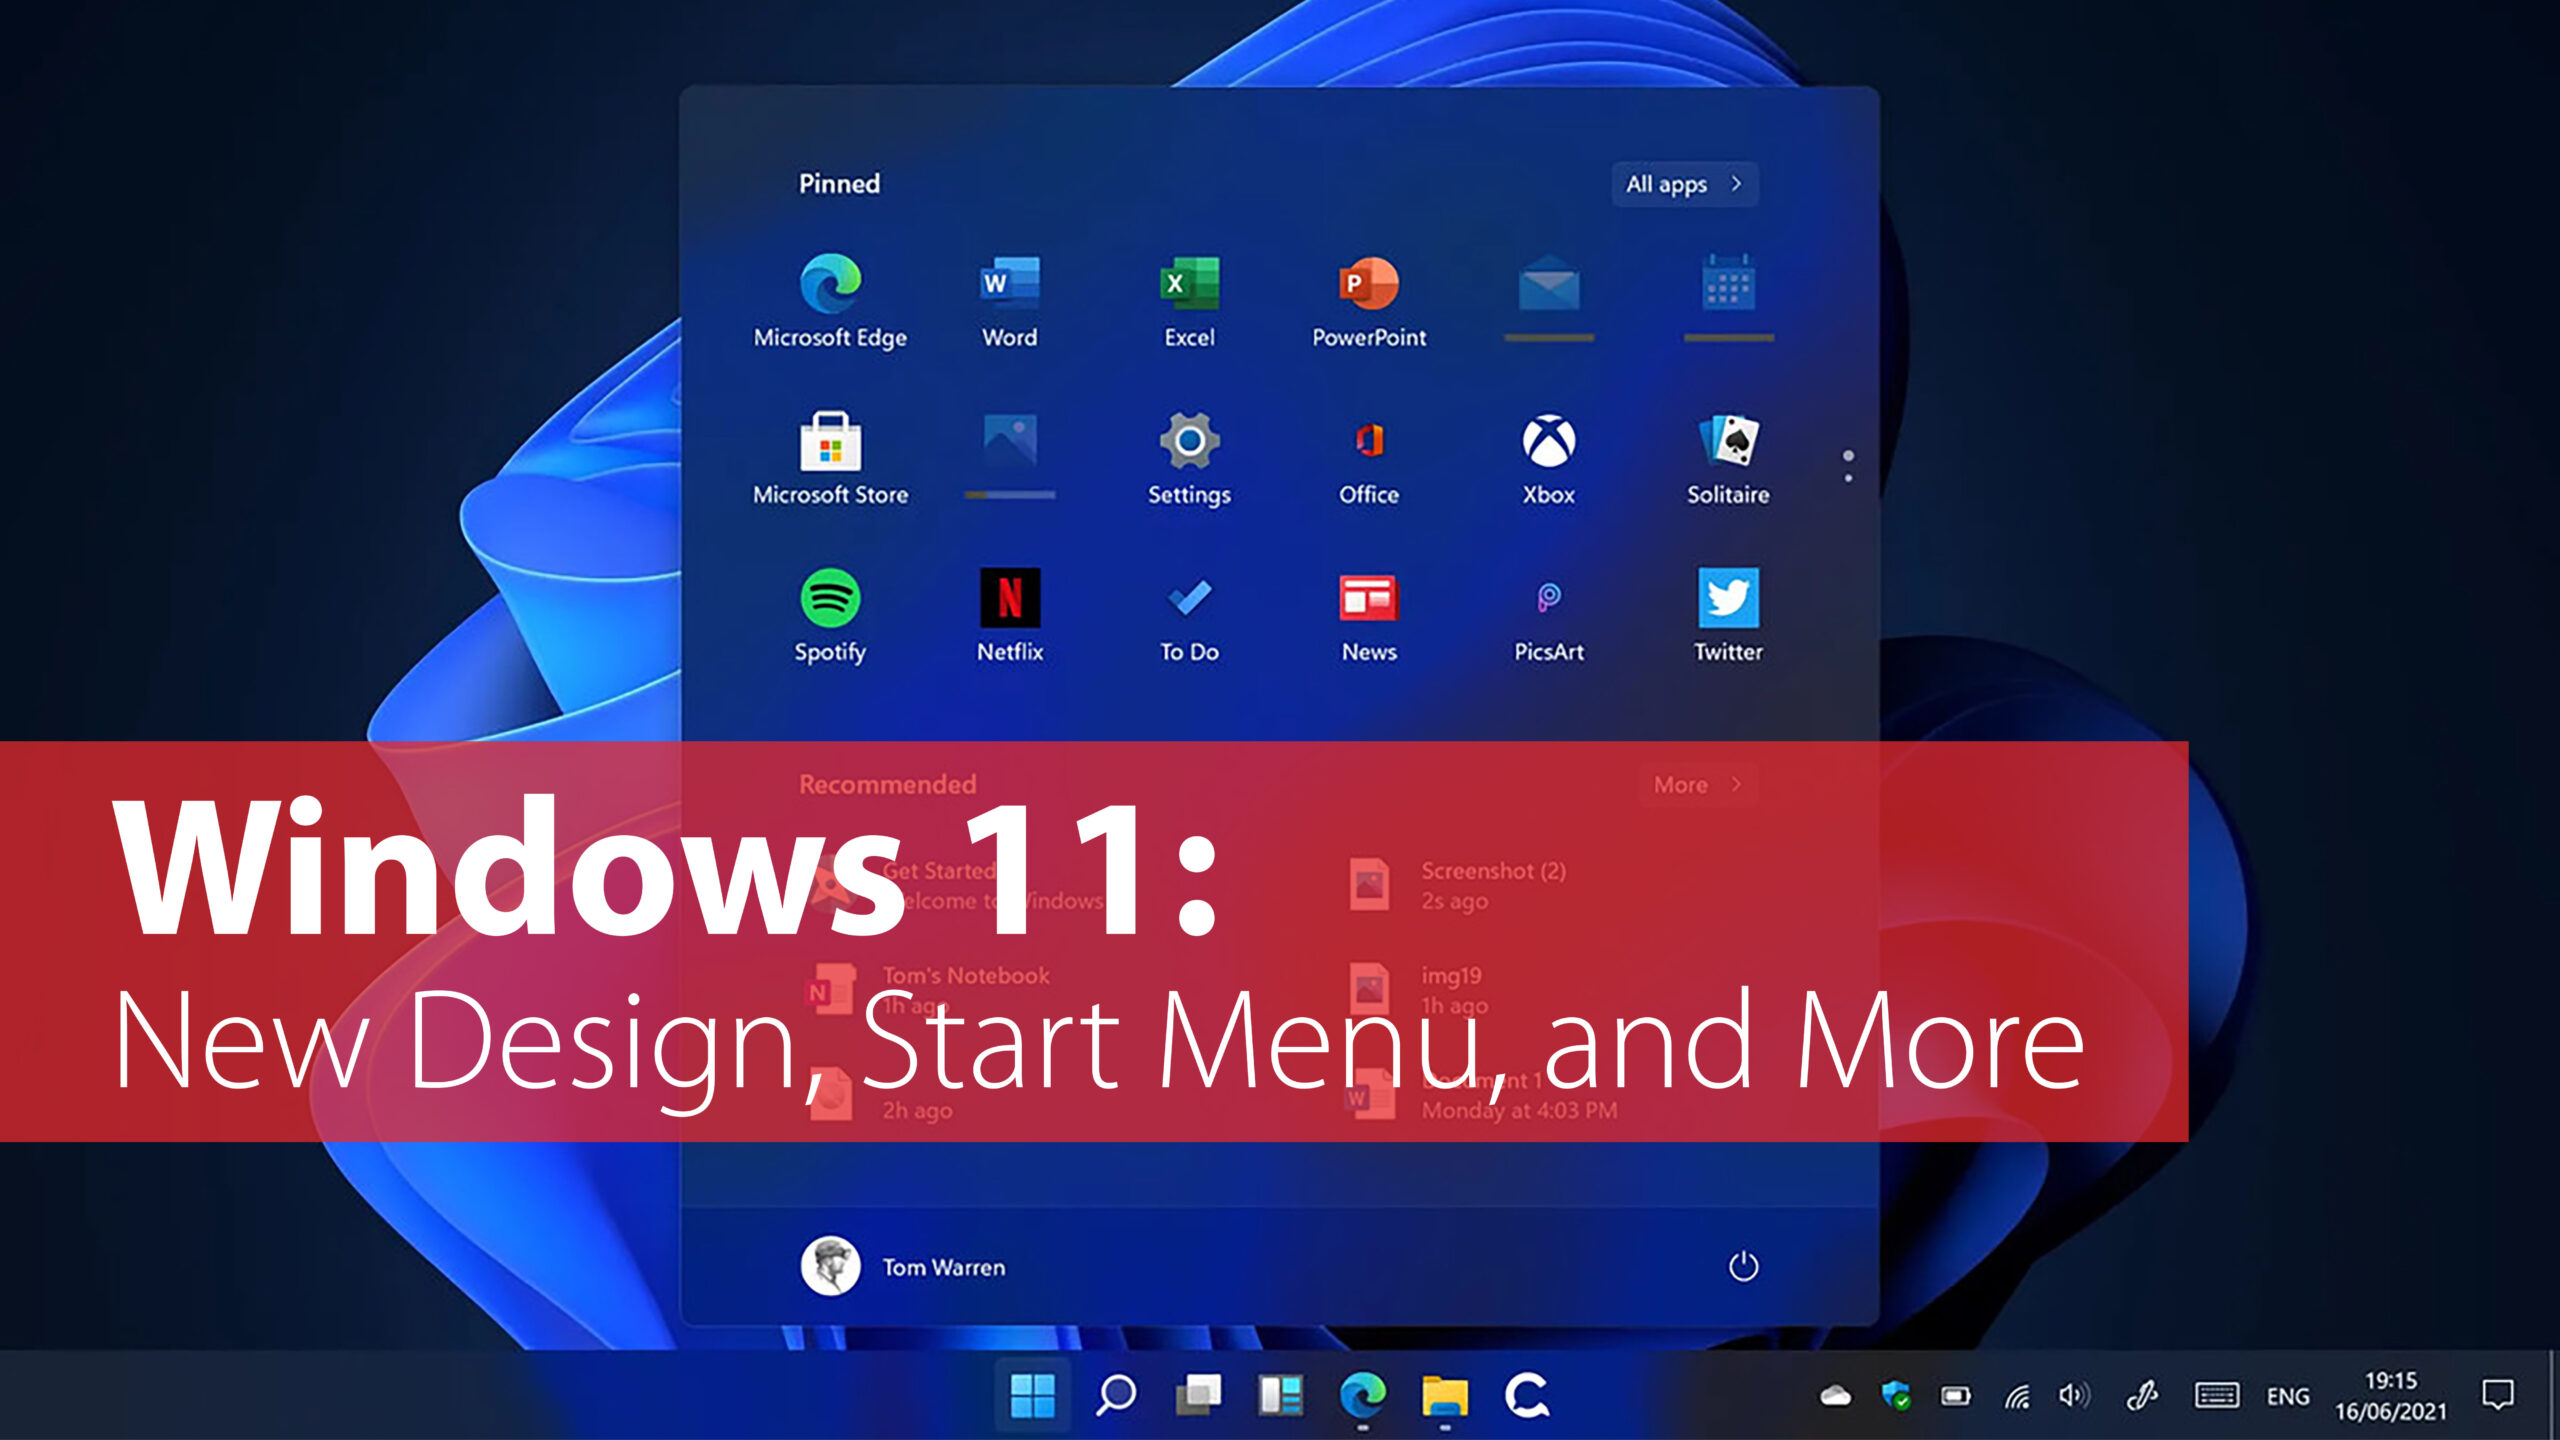 Microsoft Announces Windows 11, with A New Design, Start Menu, and More